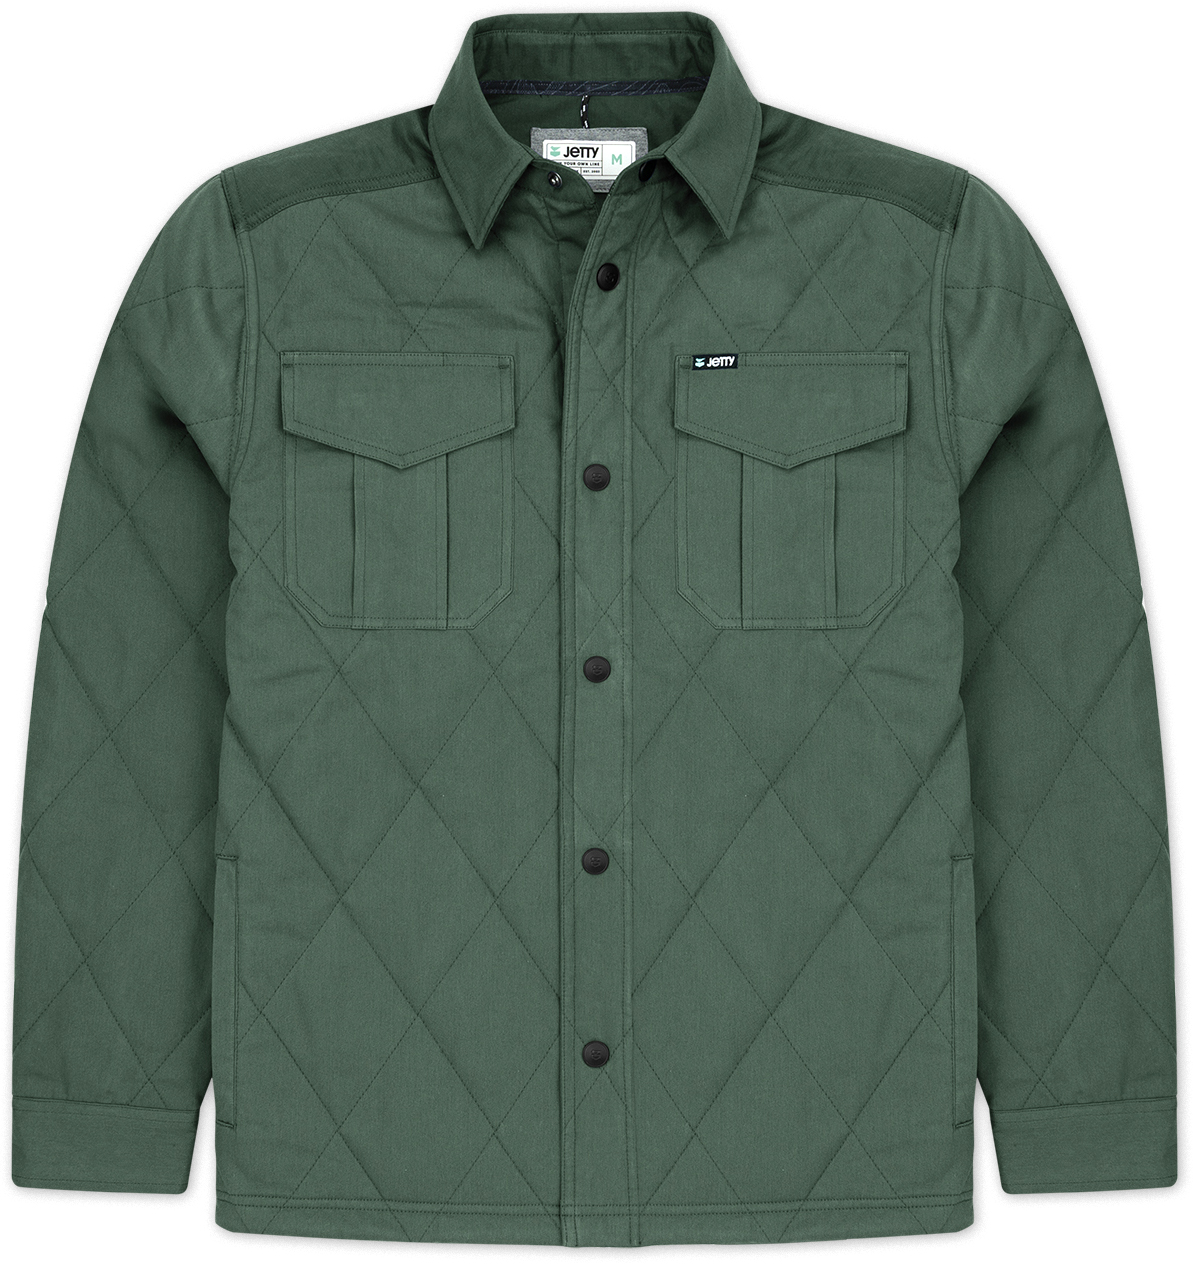 Jetty Men's The Dogwood Quilted Jacket